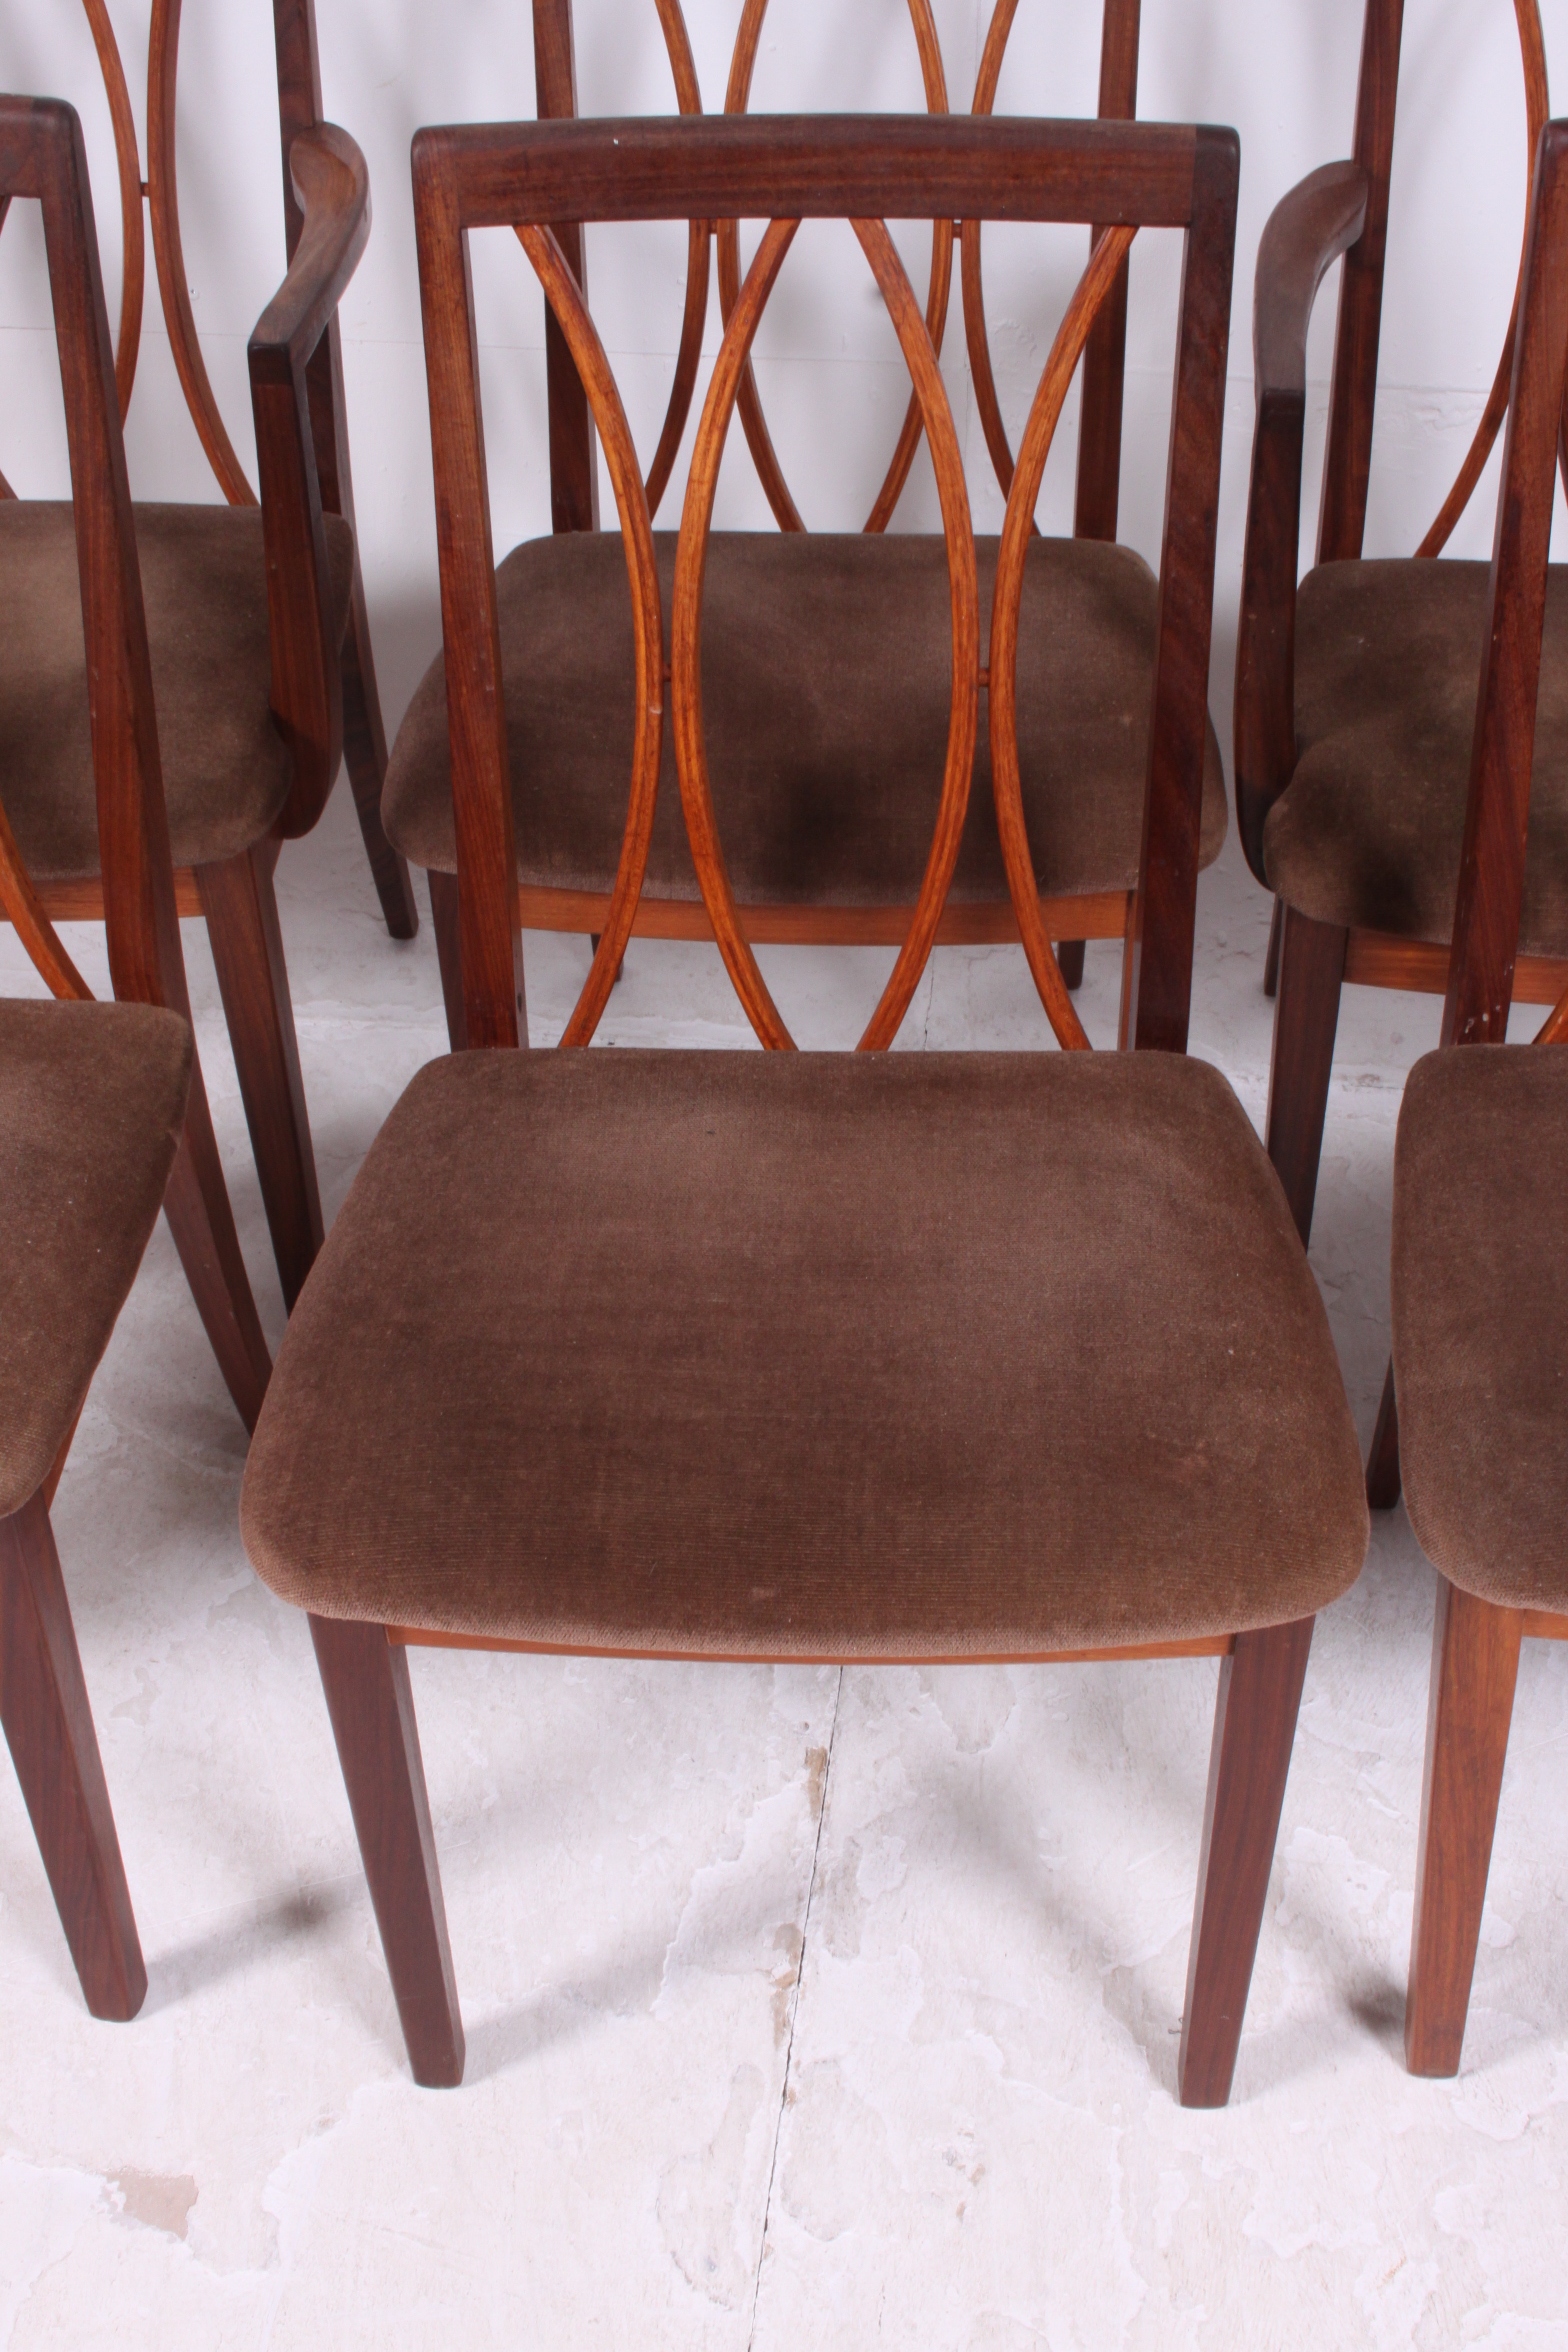 A set of 6 1970's retro vintage teak wood dining chairs by G-Plan. - Image 3 of 4